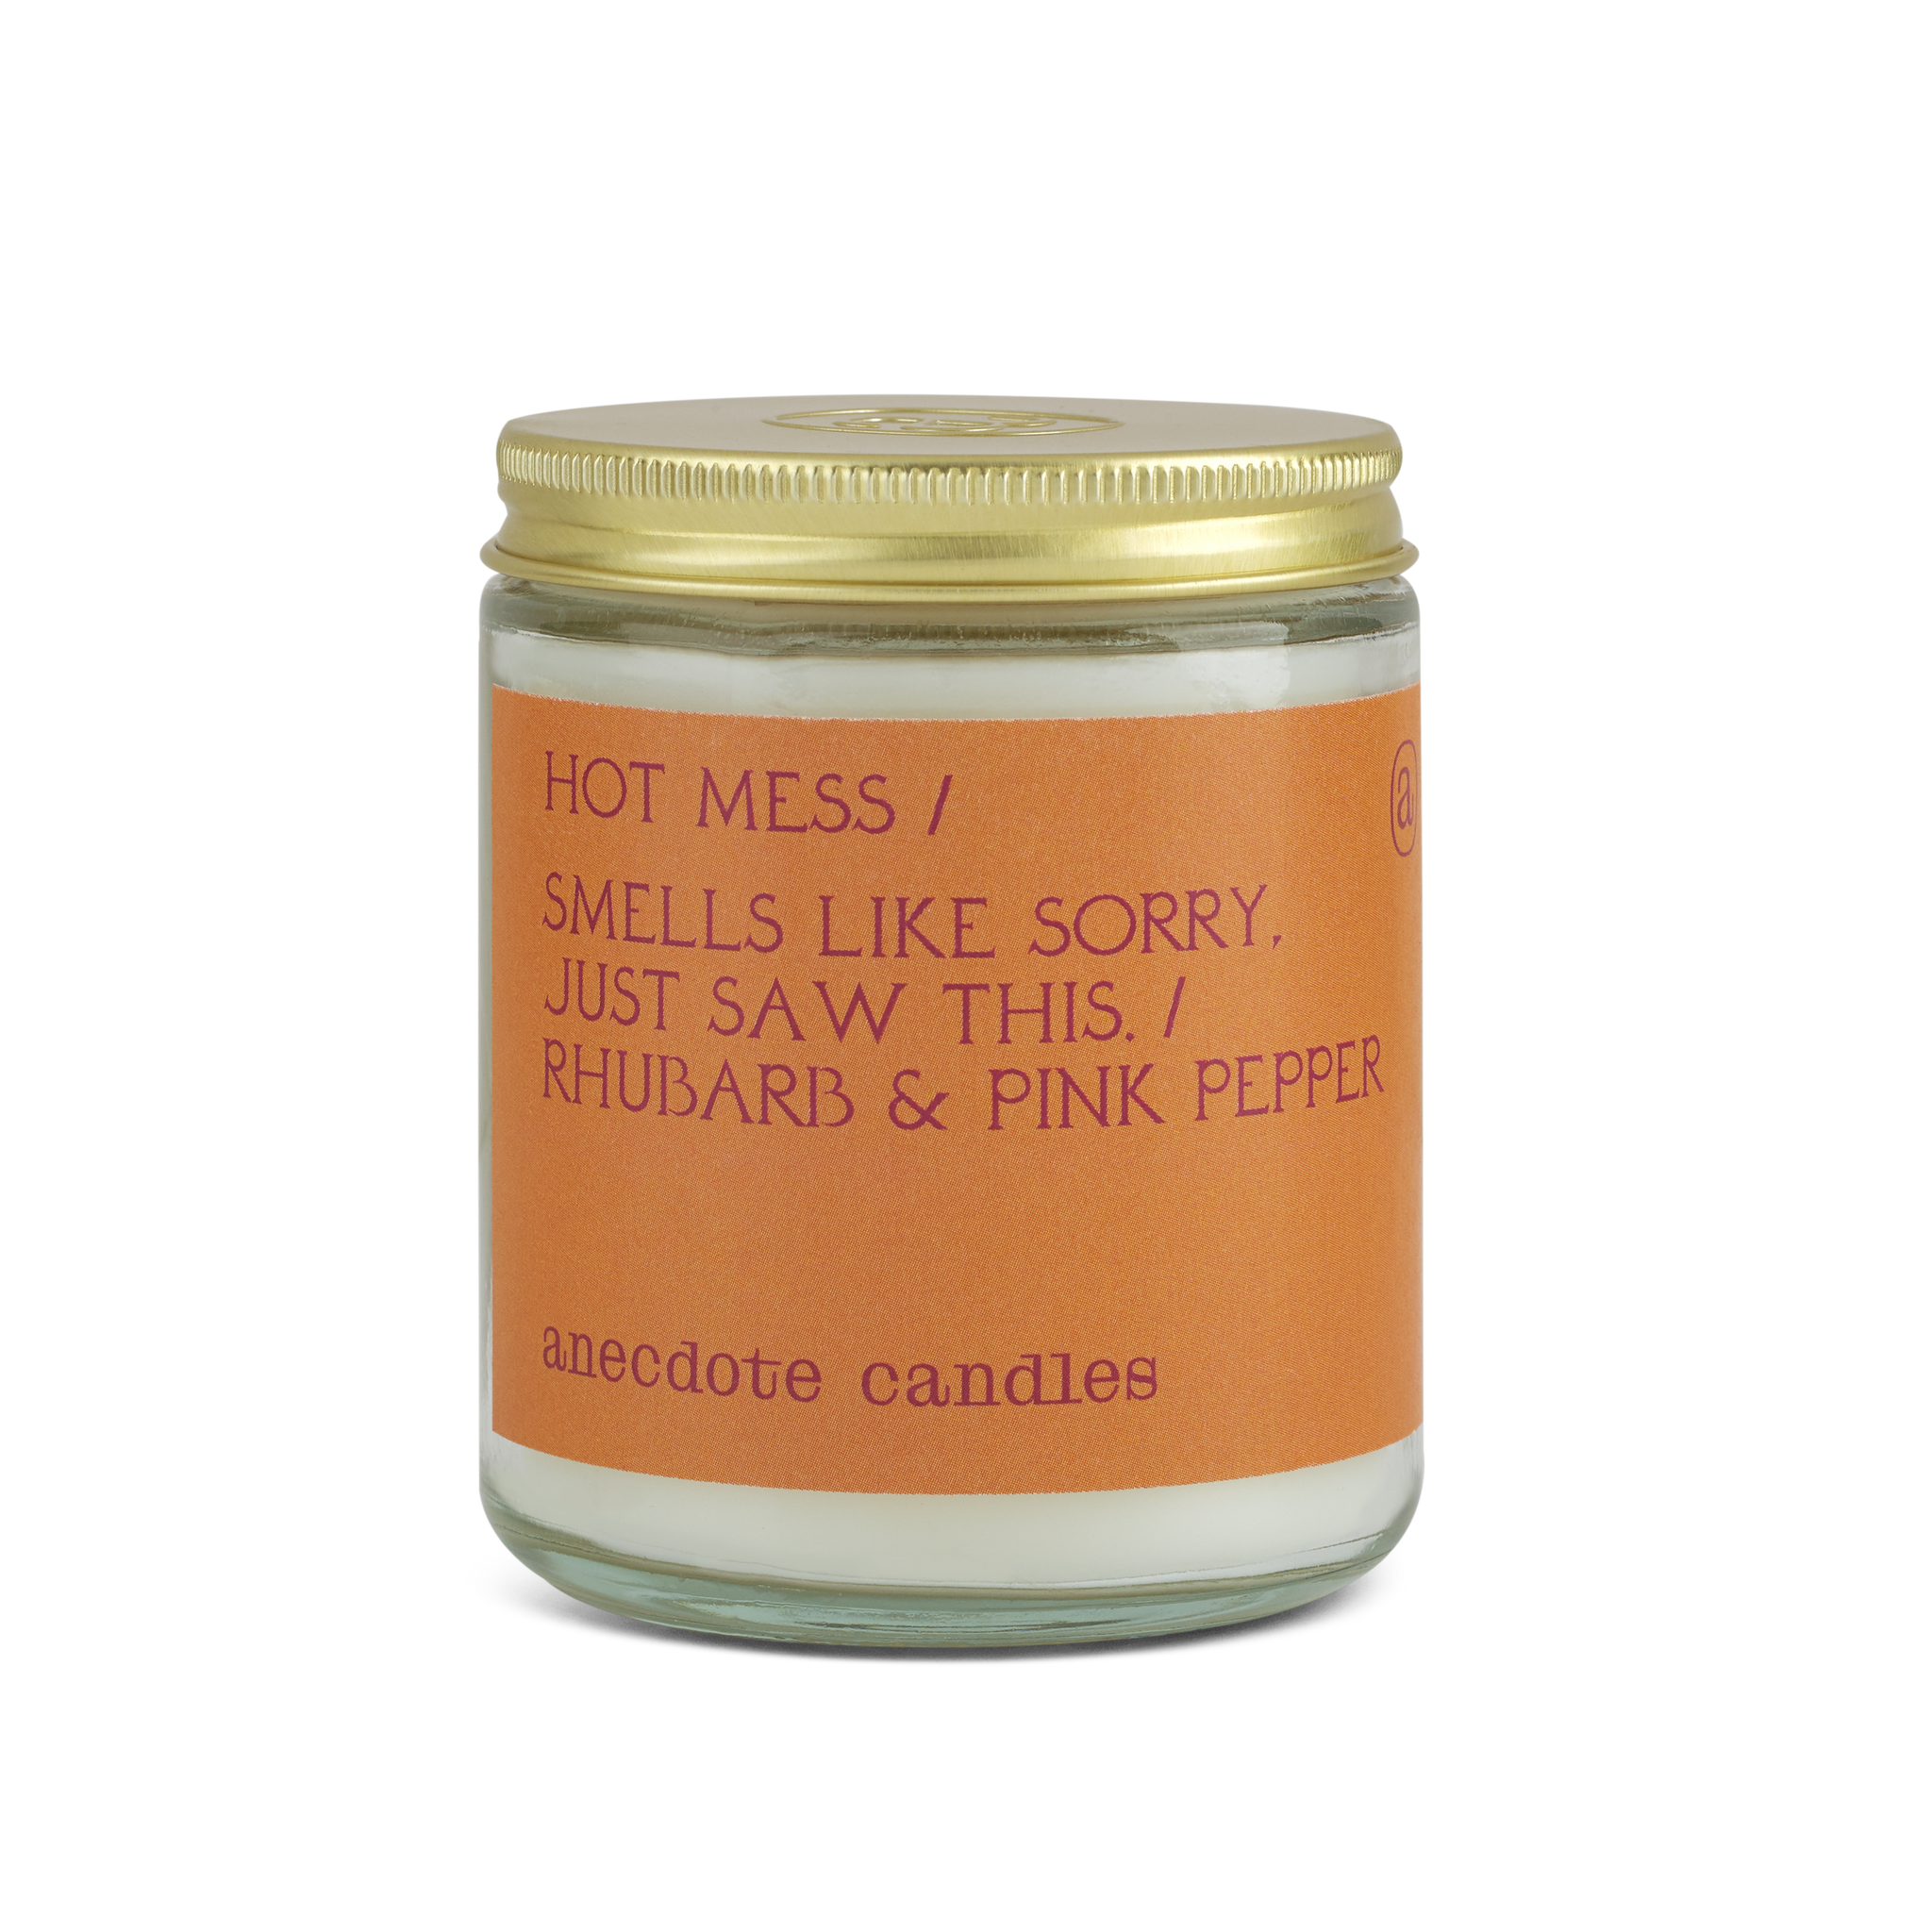 "Hot Mess" (Rhubarb & Pink Pepper) Candle